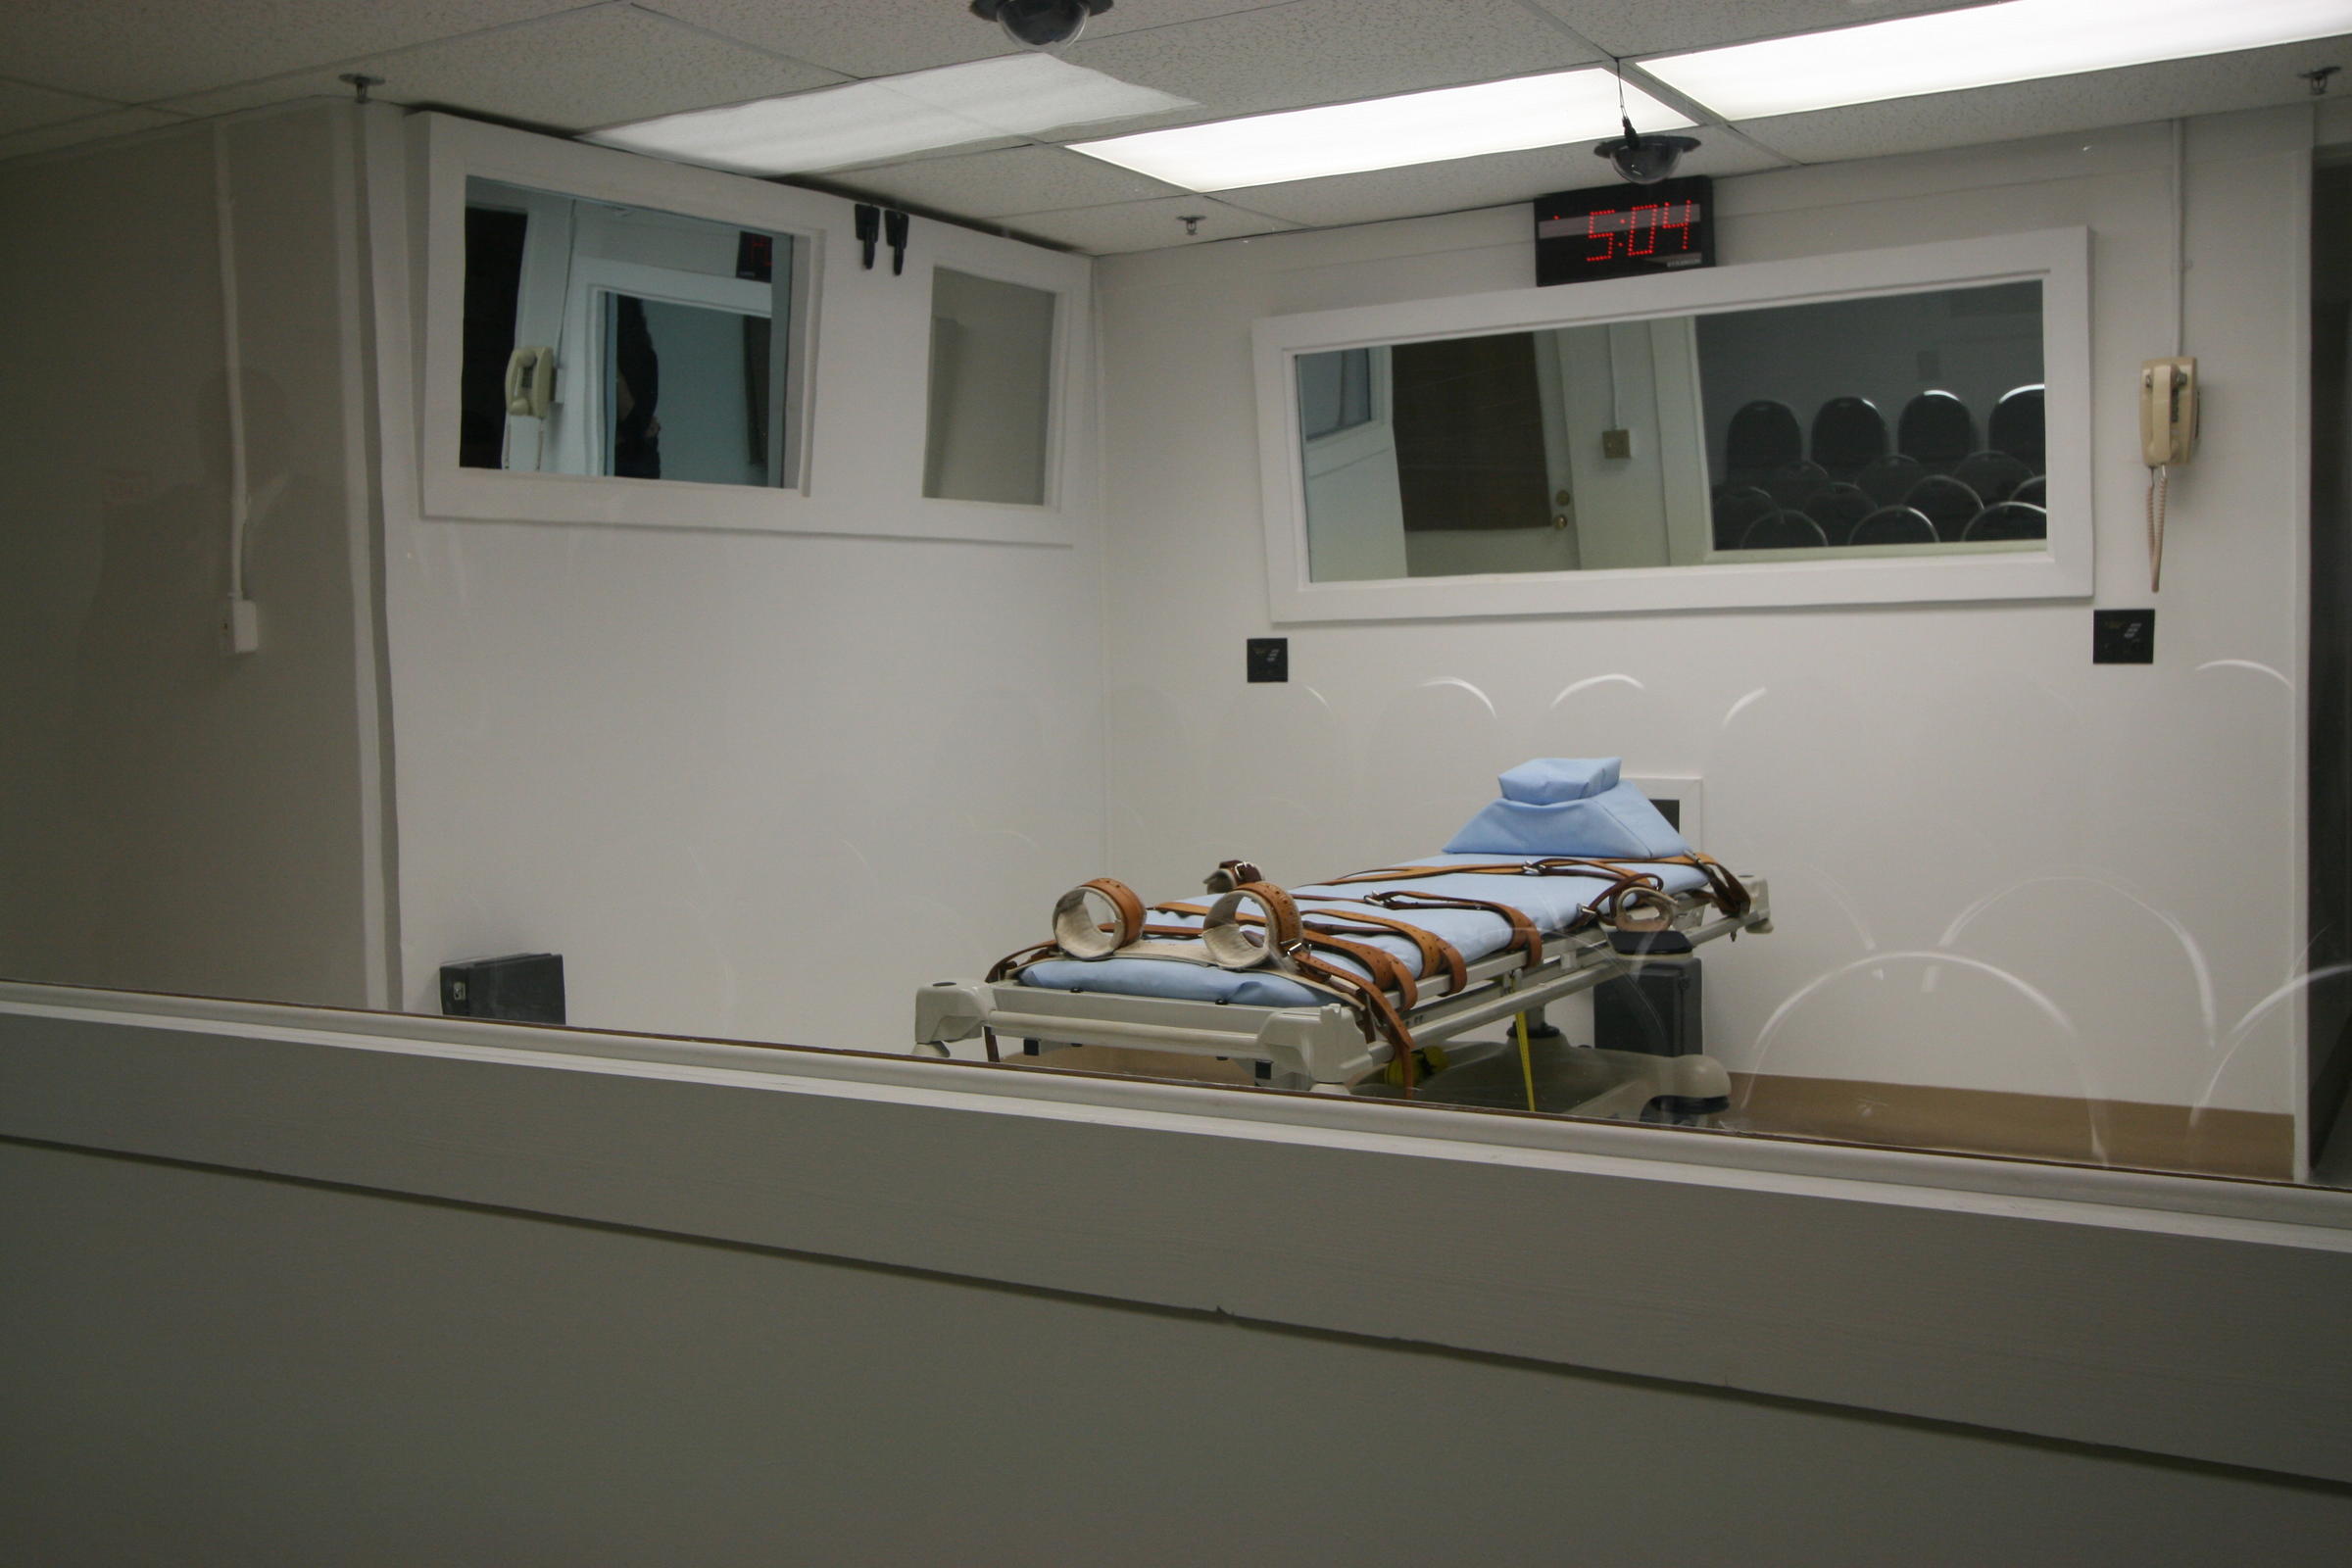 Death Penalty Back On The Books In Florida Health News Florida